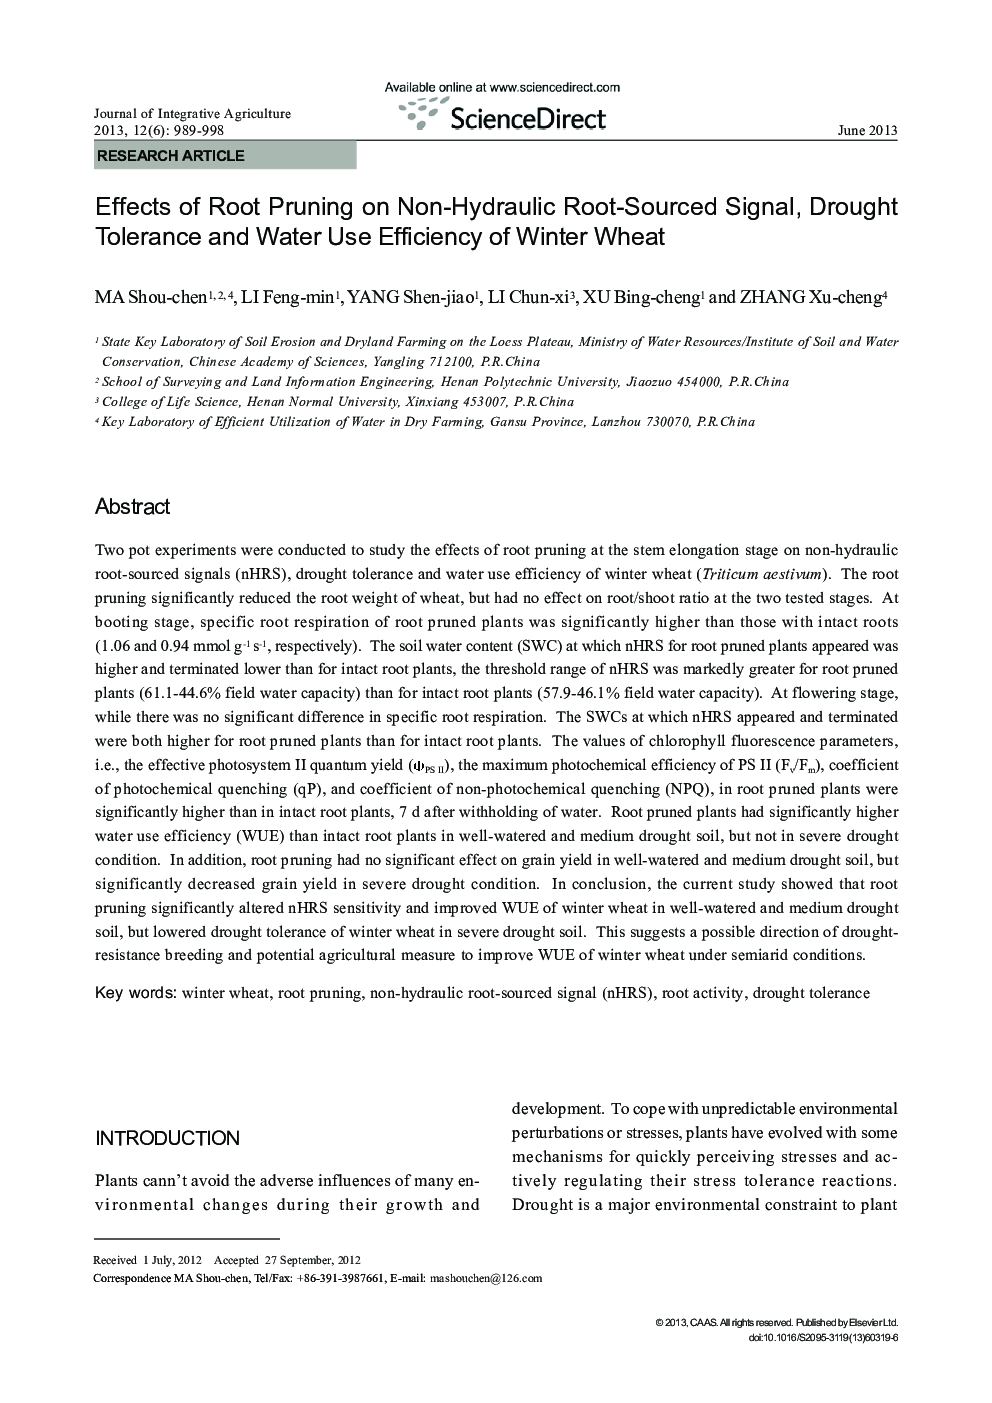 Effects of Root Pruning on Non-Hydraulic Root-Sourced Signal, Drought Tolerance and Water Use Efficiency of Winter Wheat